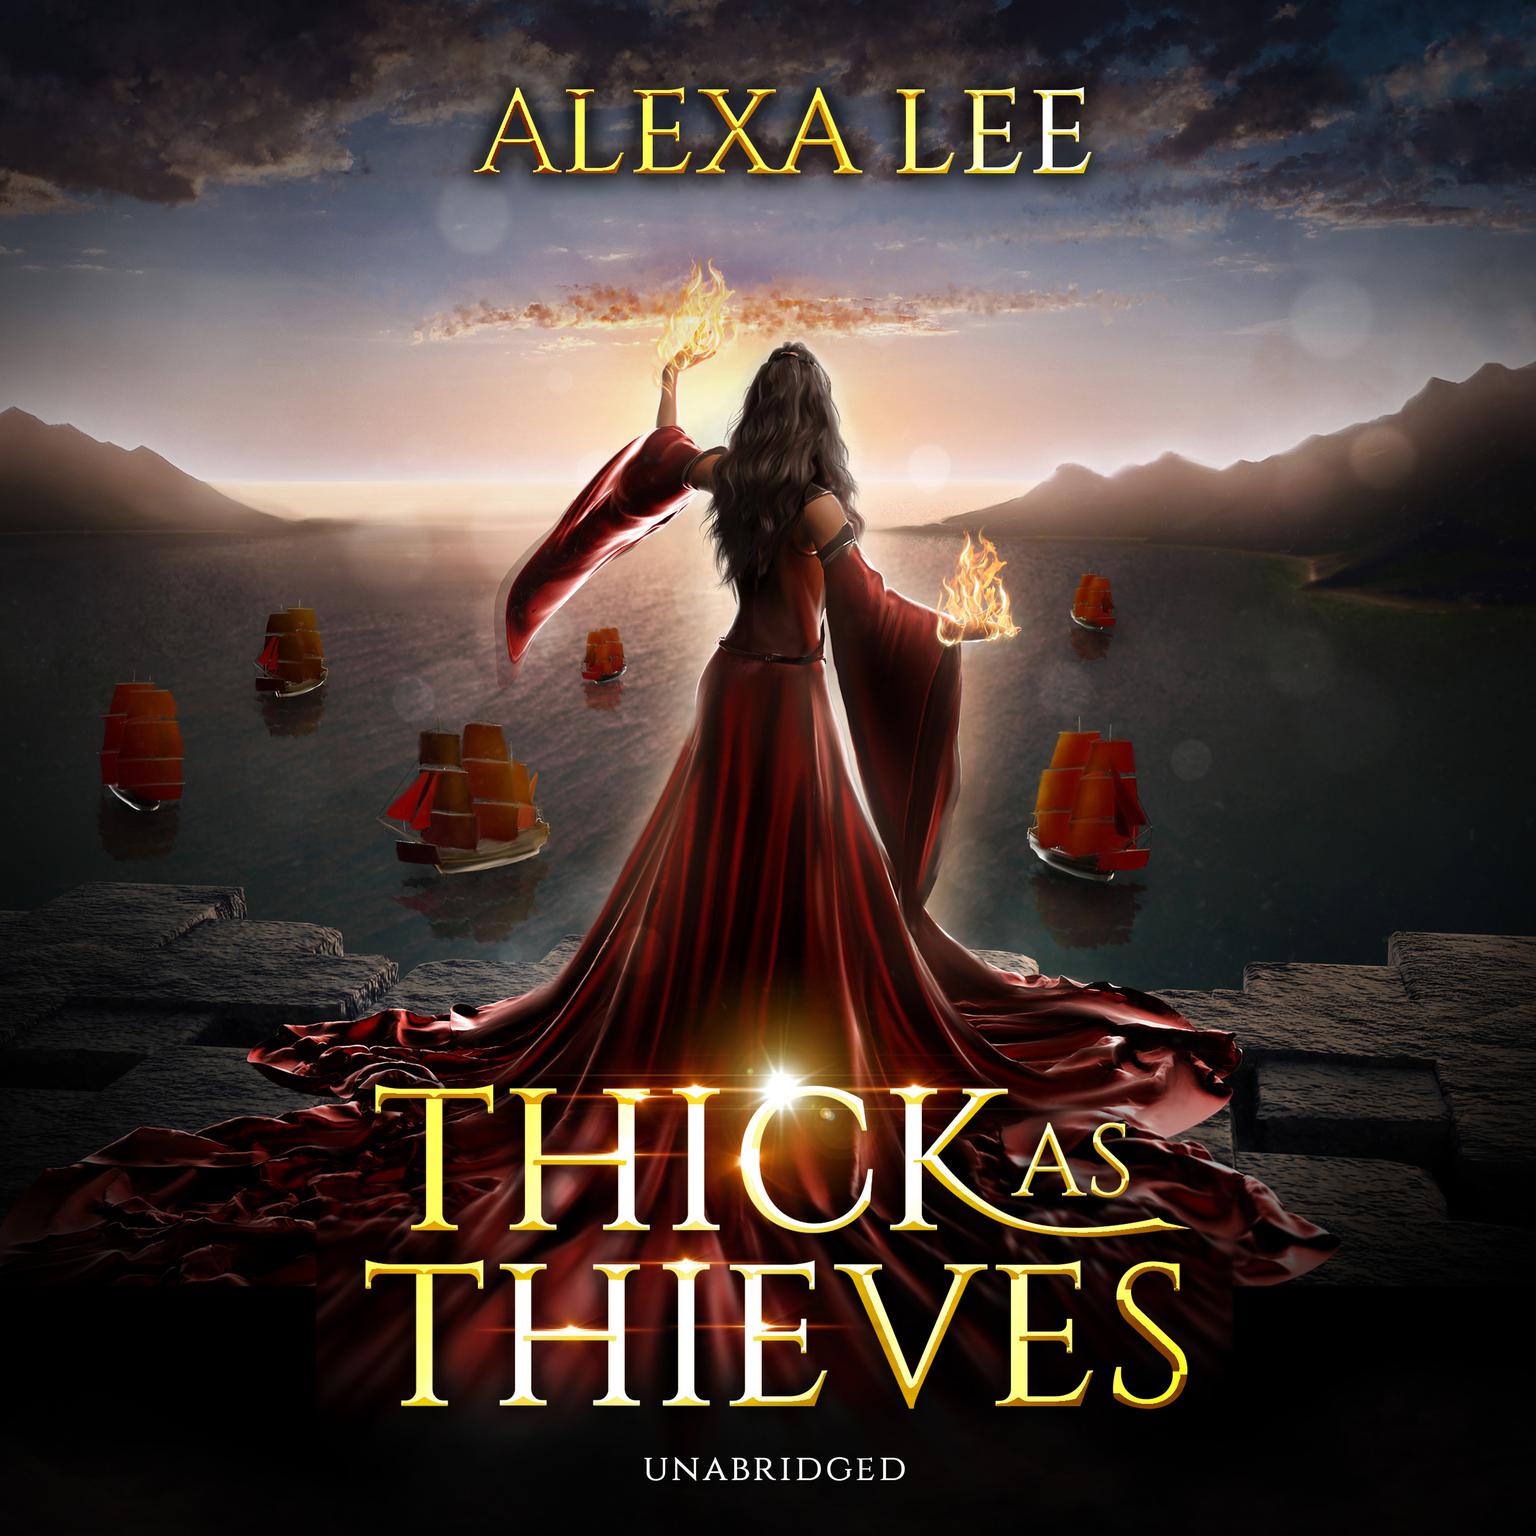 Thick as Thieves Audiobook, by Alexa Lee